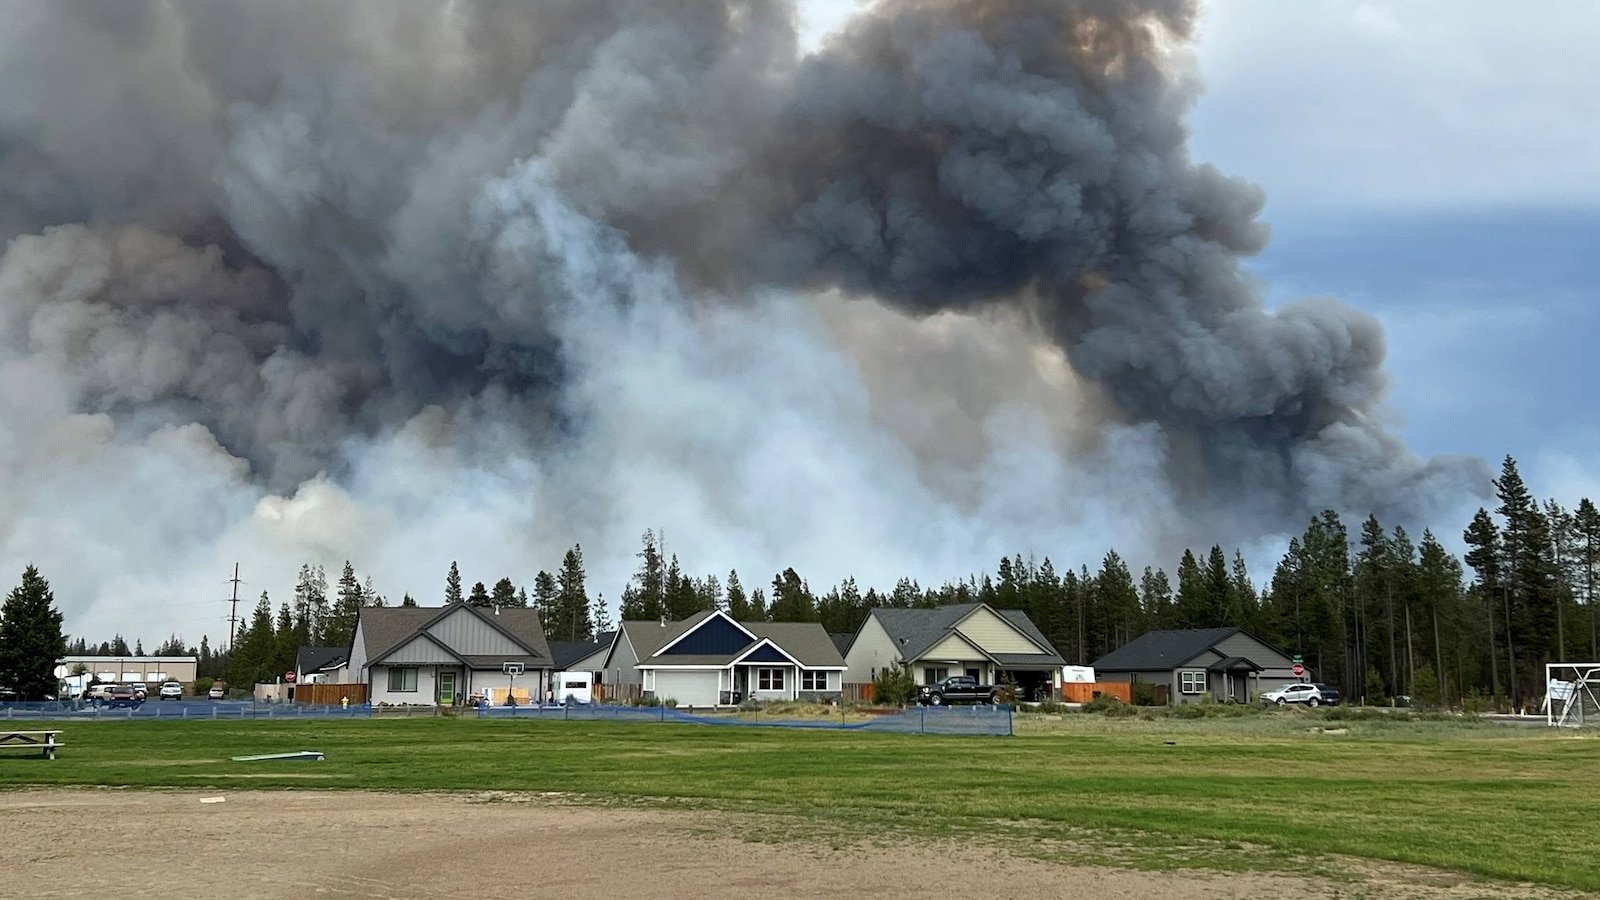 Oregon wildfire grows to 1,700 acres, prompts emergency declaration